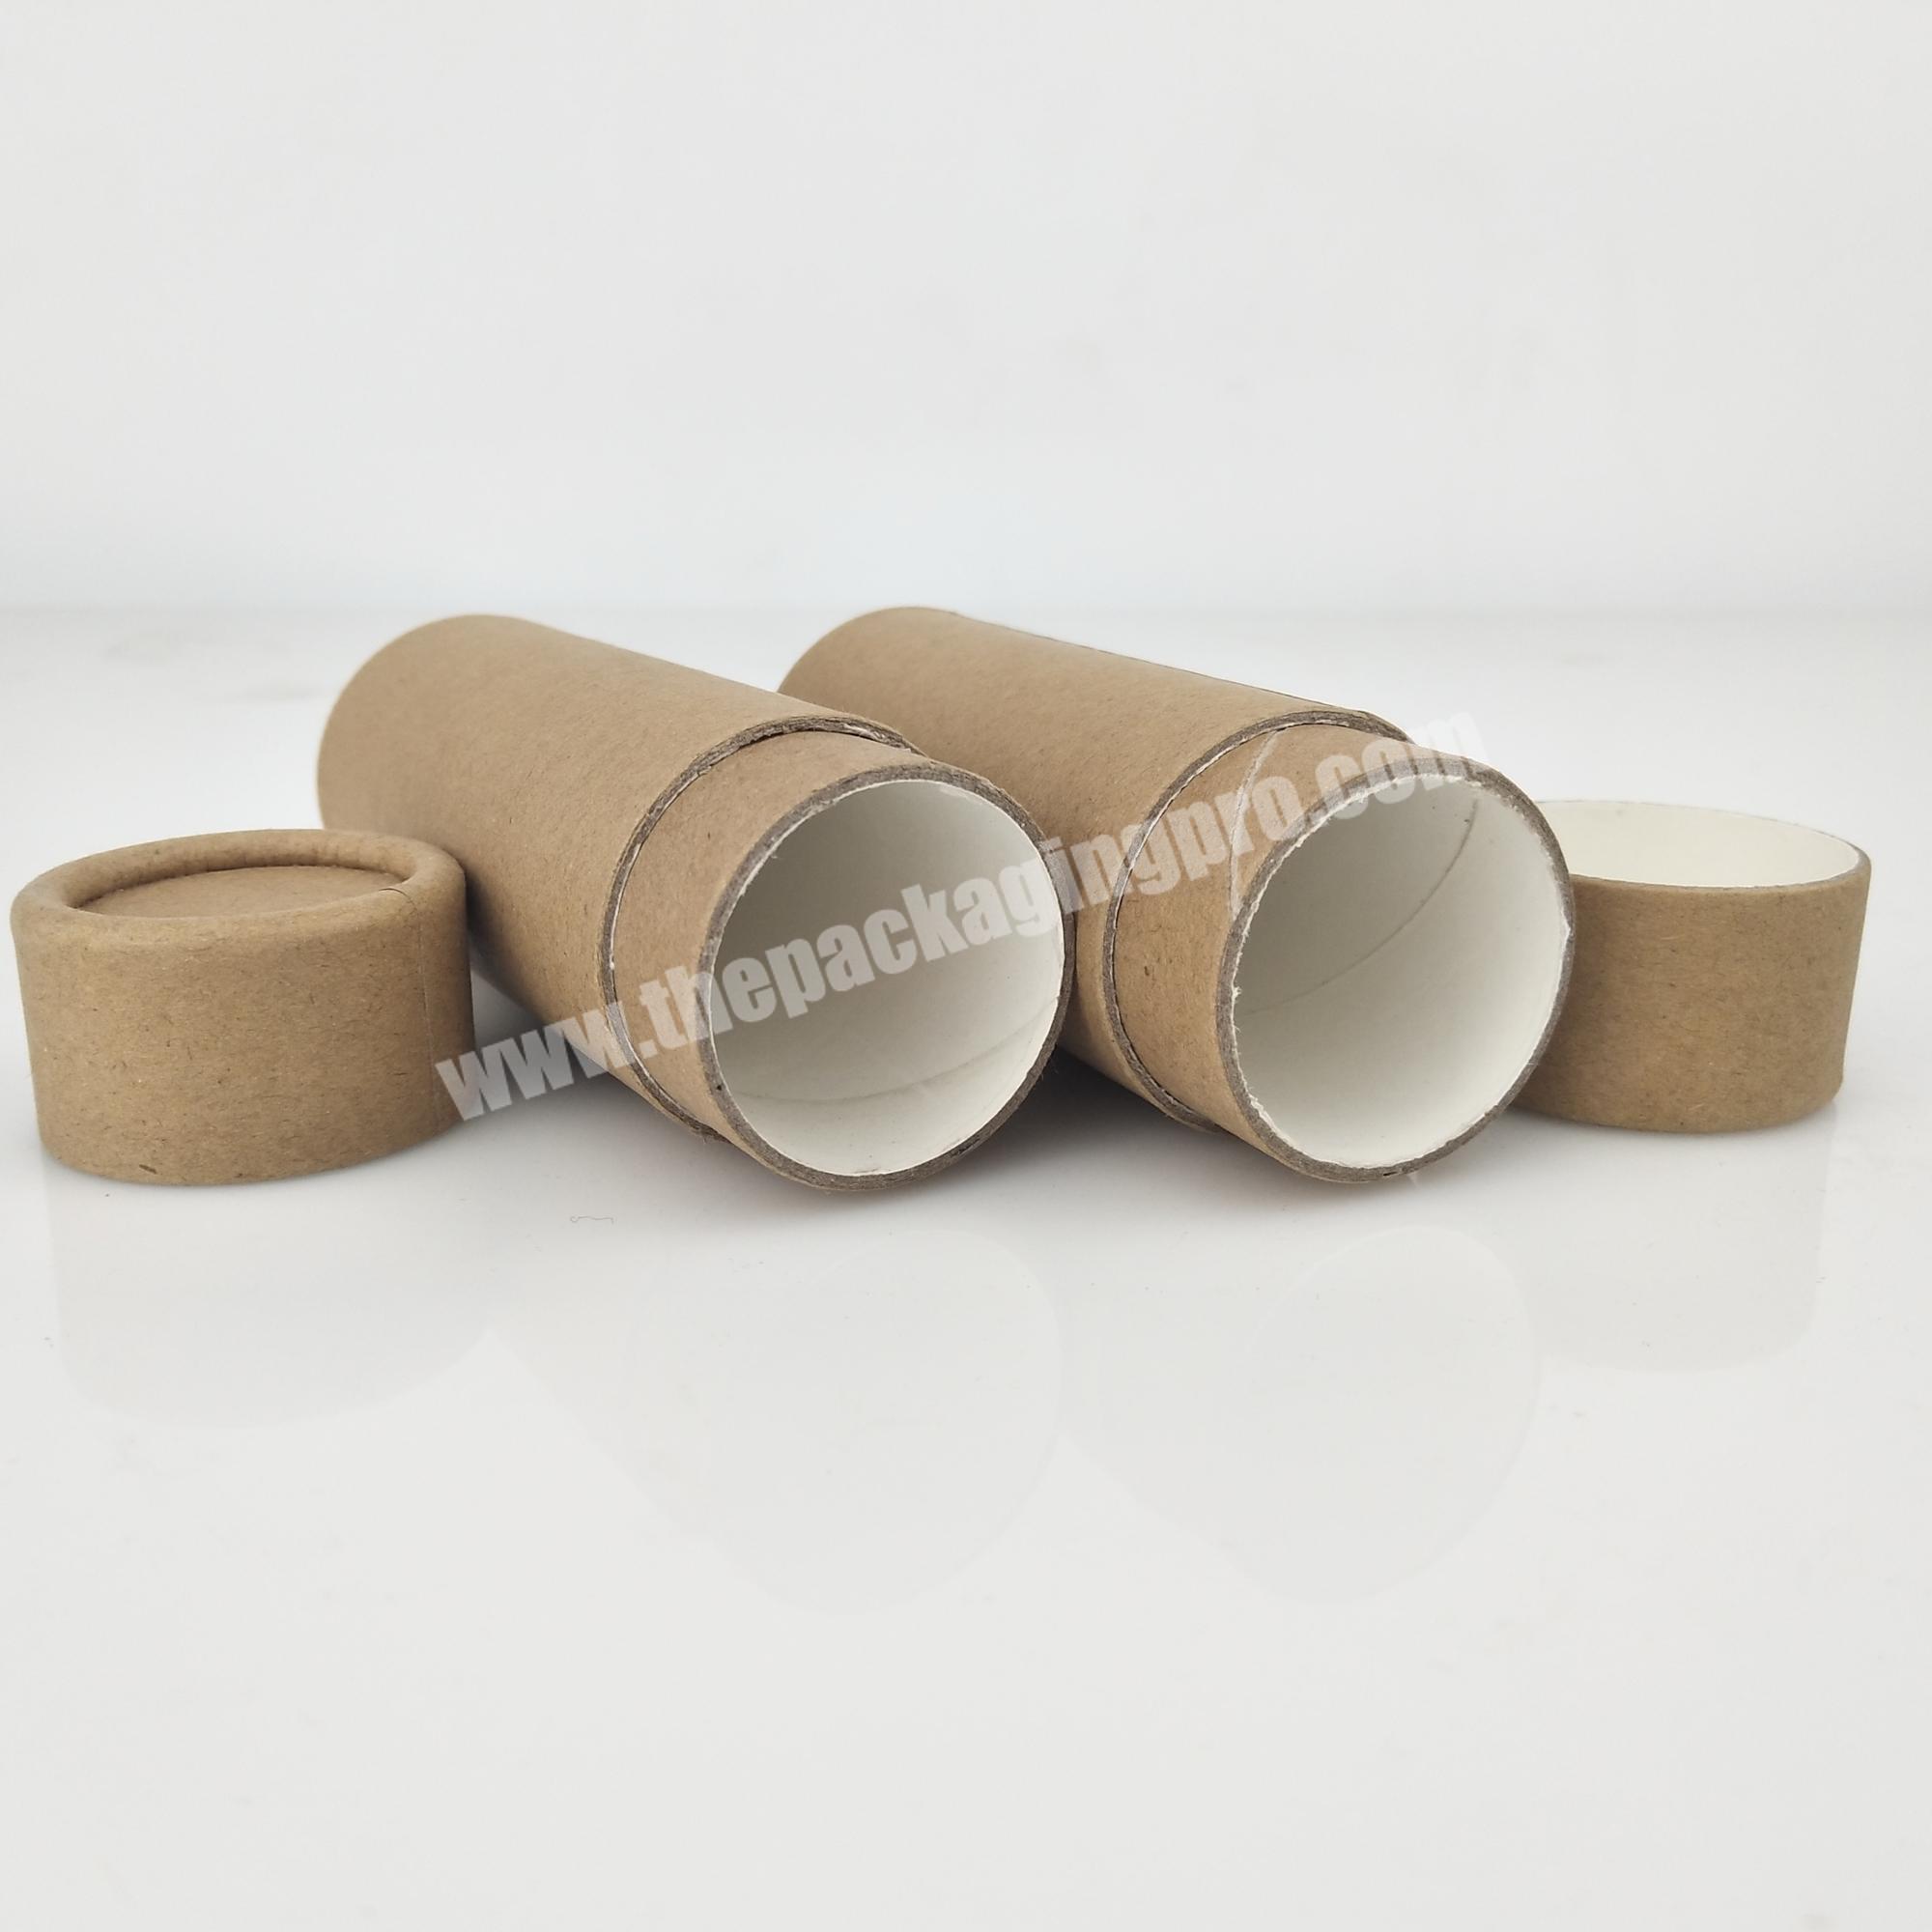 Push up cylinder lip balm tube,deodorant paper tube container with lid,paper tube packaging